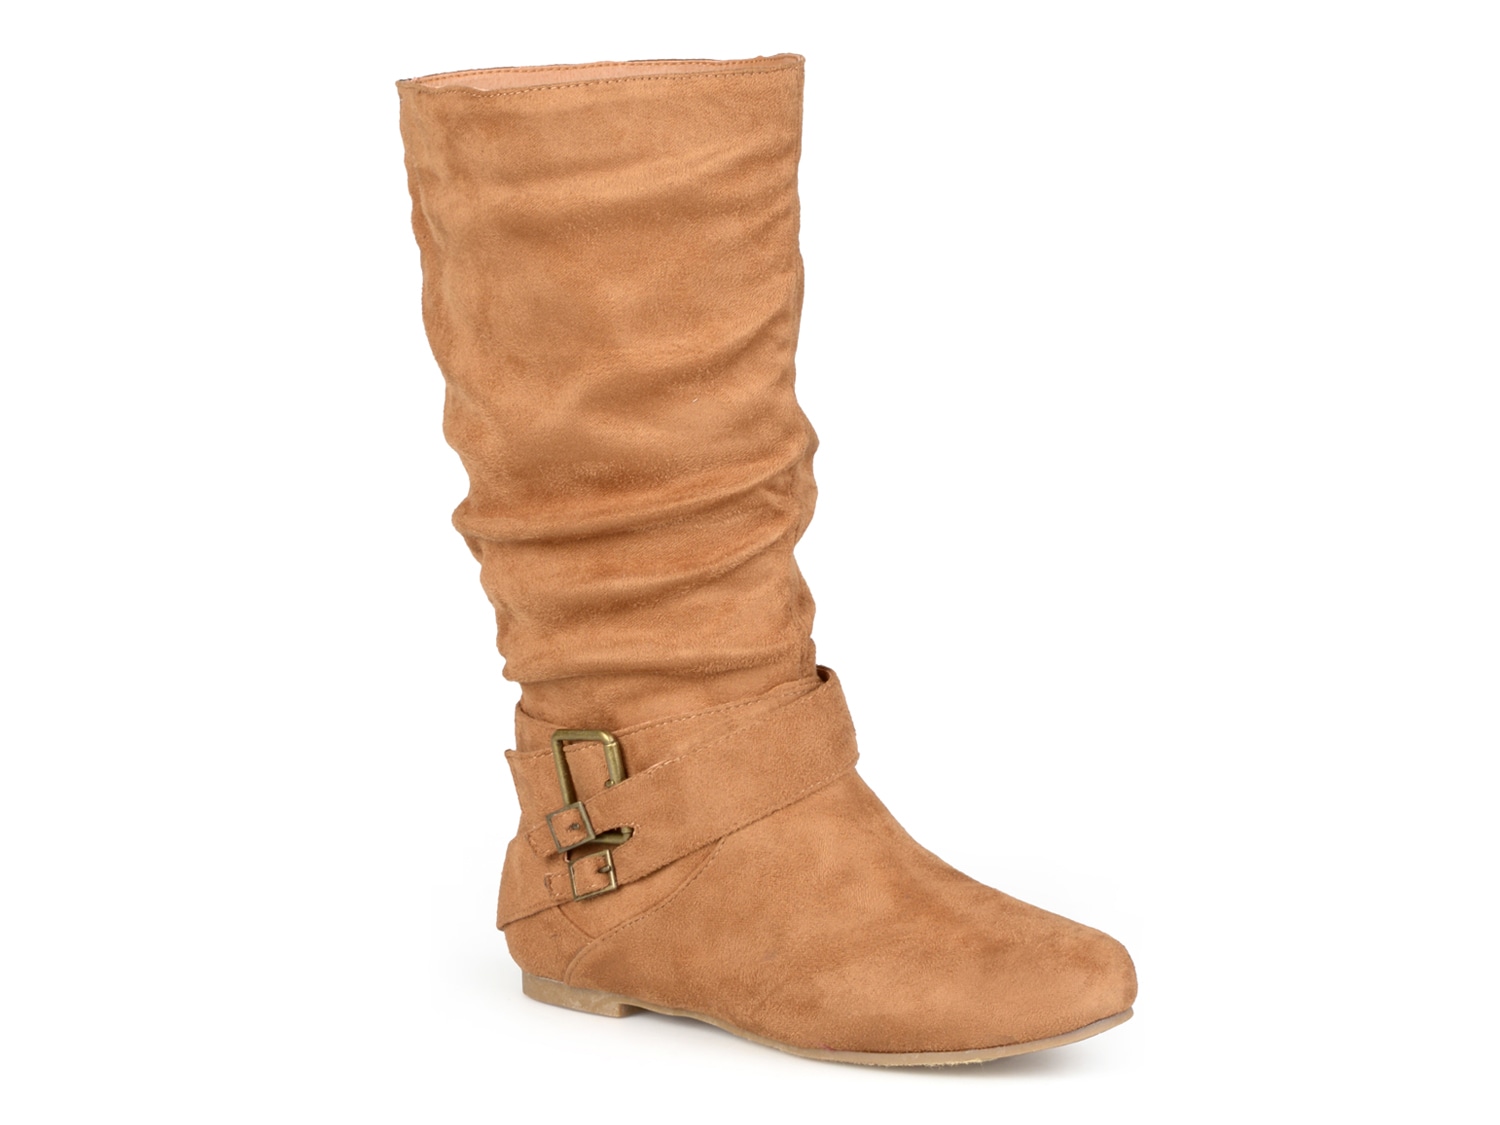 Journee Collection Shelley-6 Boot | DSW